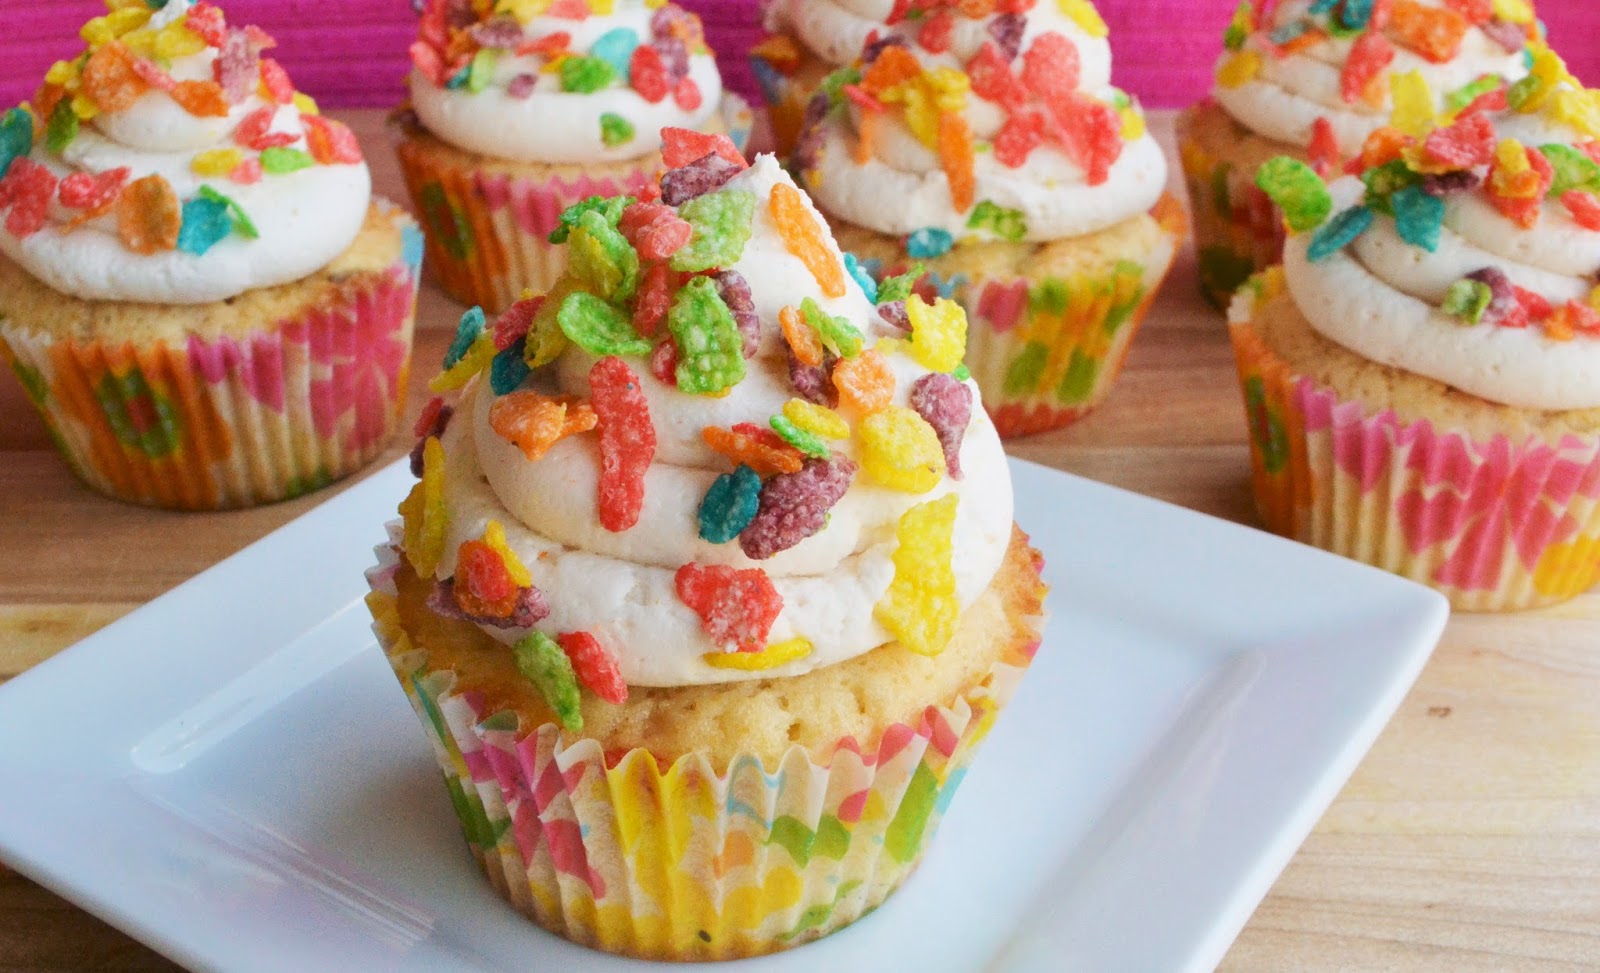 8 Photos of Fruity Cereal Cupcakes